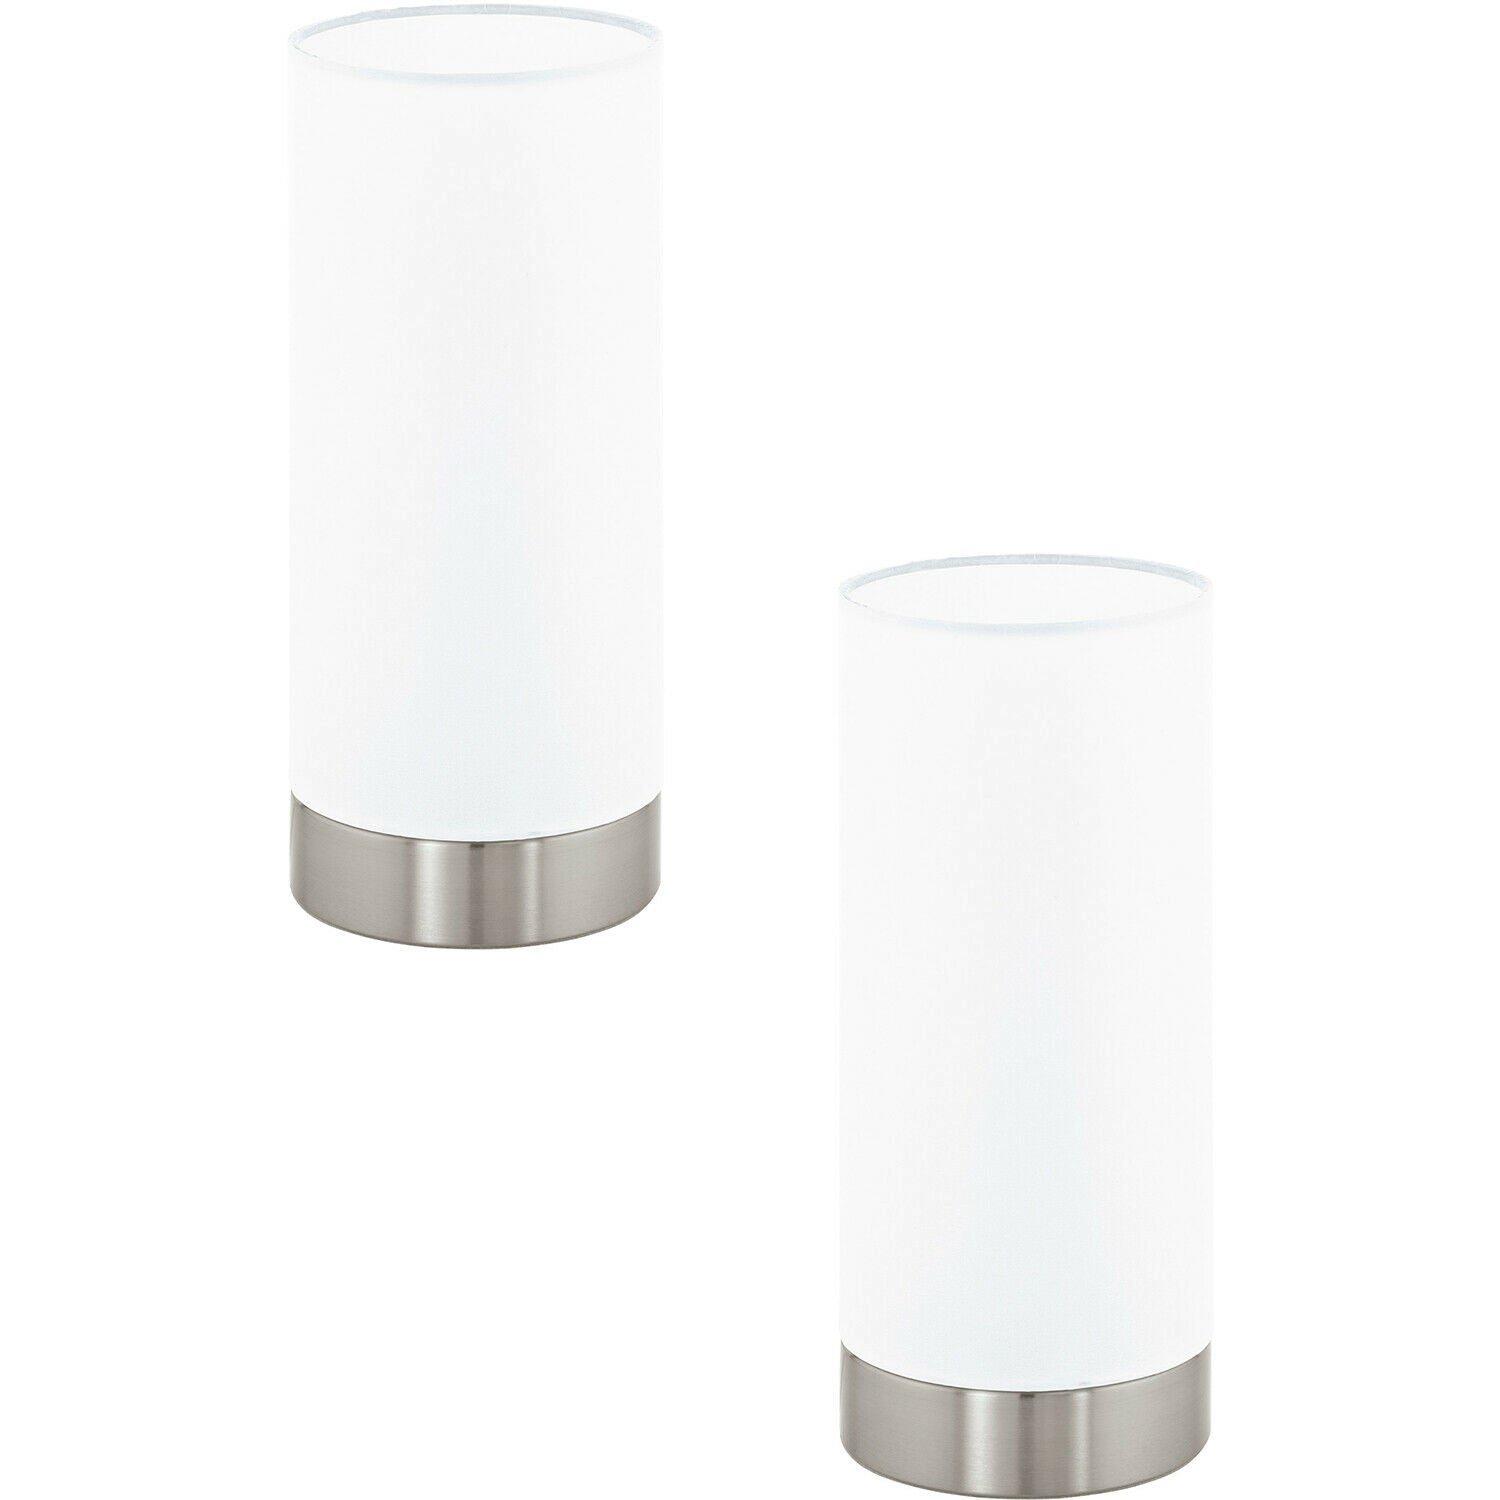 2 PACK Table Lamp Colour Satin Nickel Shade Round White Satin Glass E27 1x60W